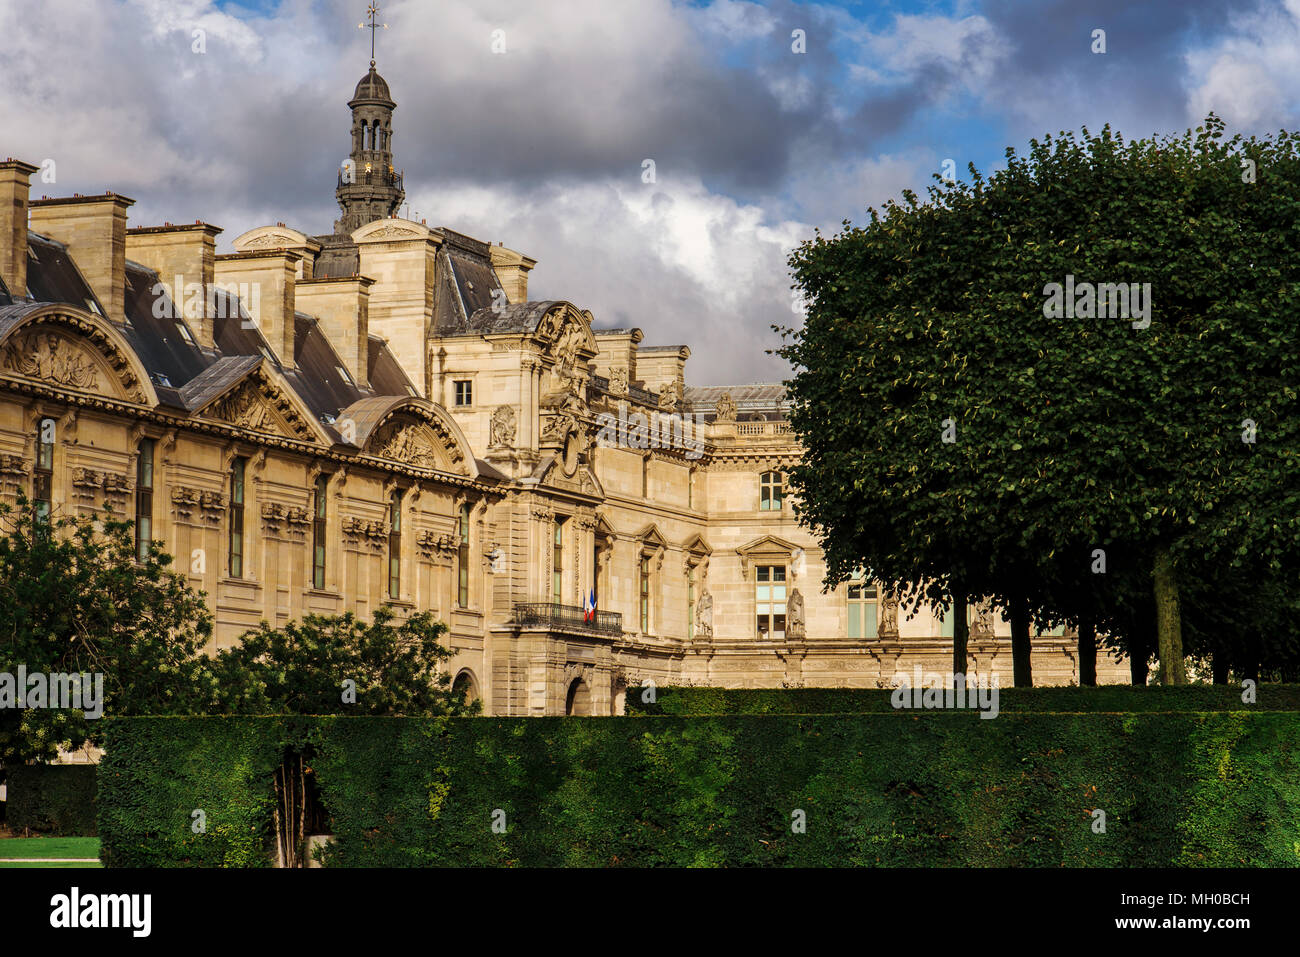 Louvre Palace and Tuileries Garden View Stock Photo